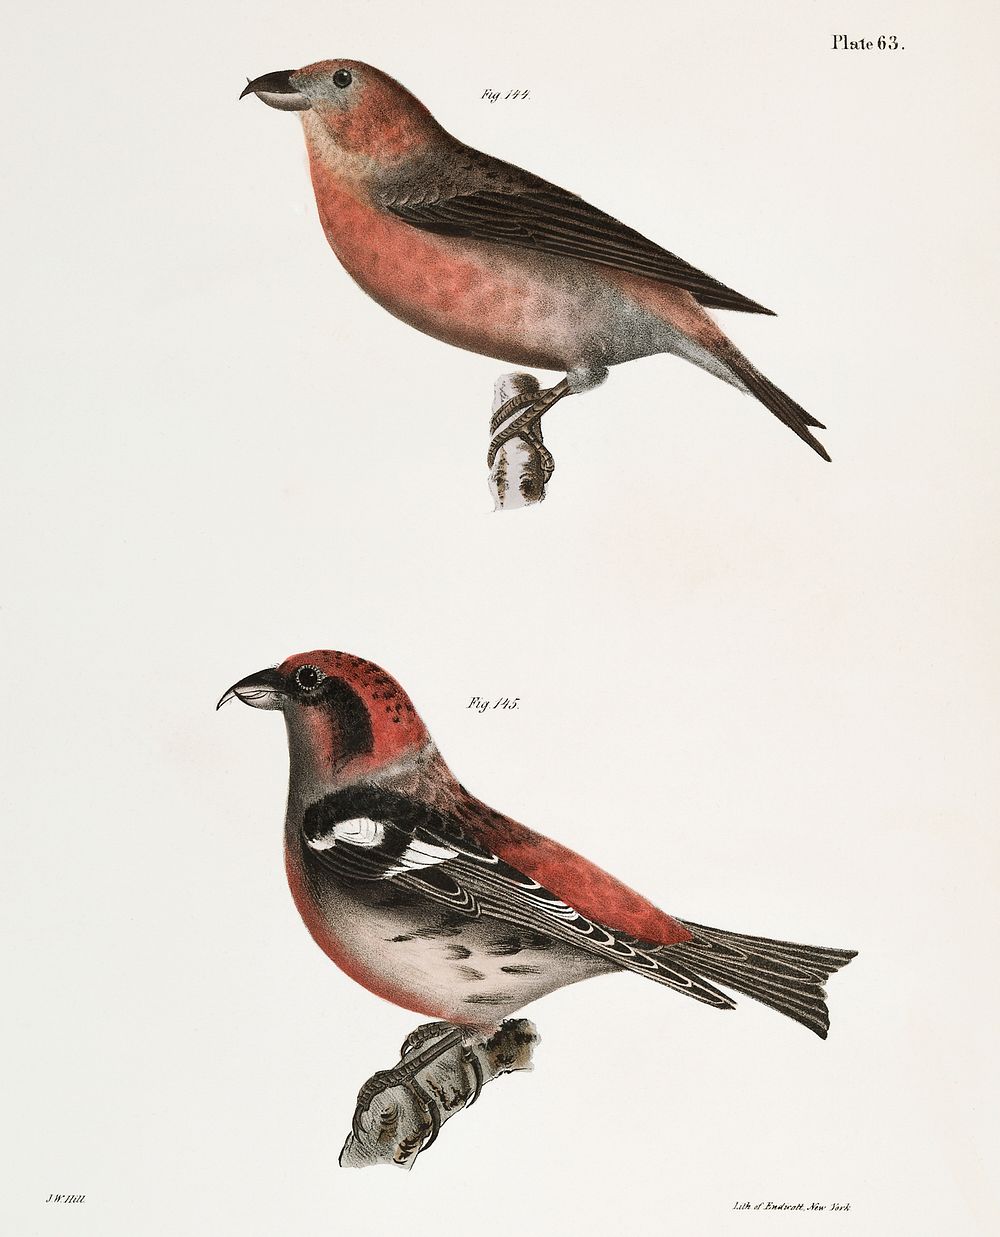 144. The American Crossbill (Loxia americana) 145. The White-winged Crossbill (Loxia leucoptera) illustration from Zoology…